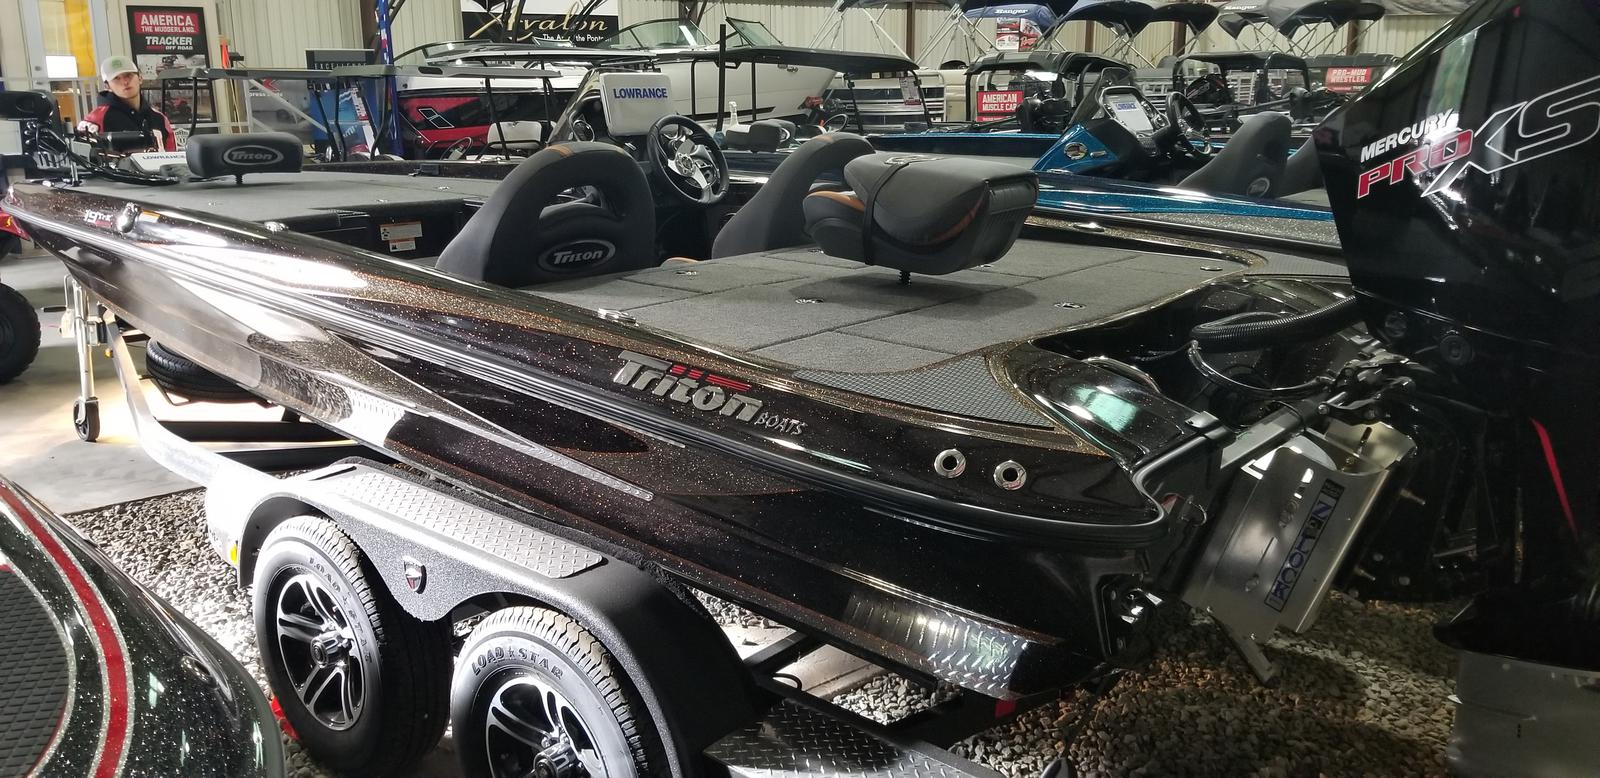 2020 Triton boat for sale, model of the boat is 19TRX w/200L PXS4 TQM 1.75 & Image # 14 of 18